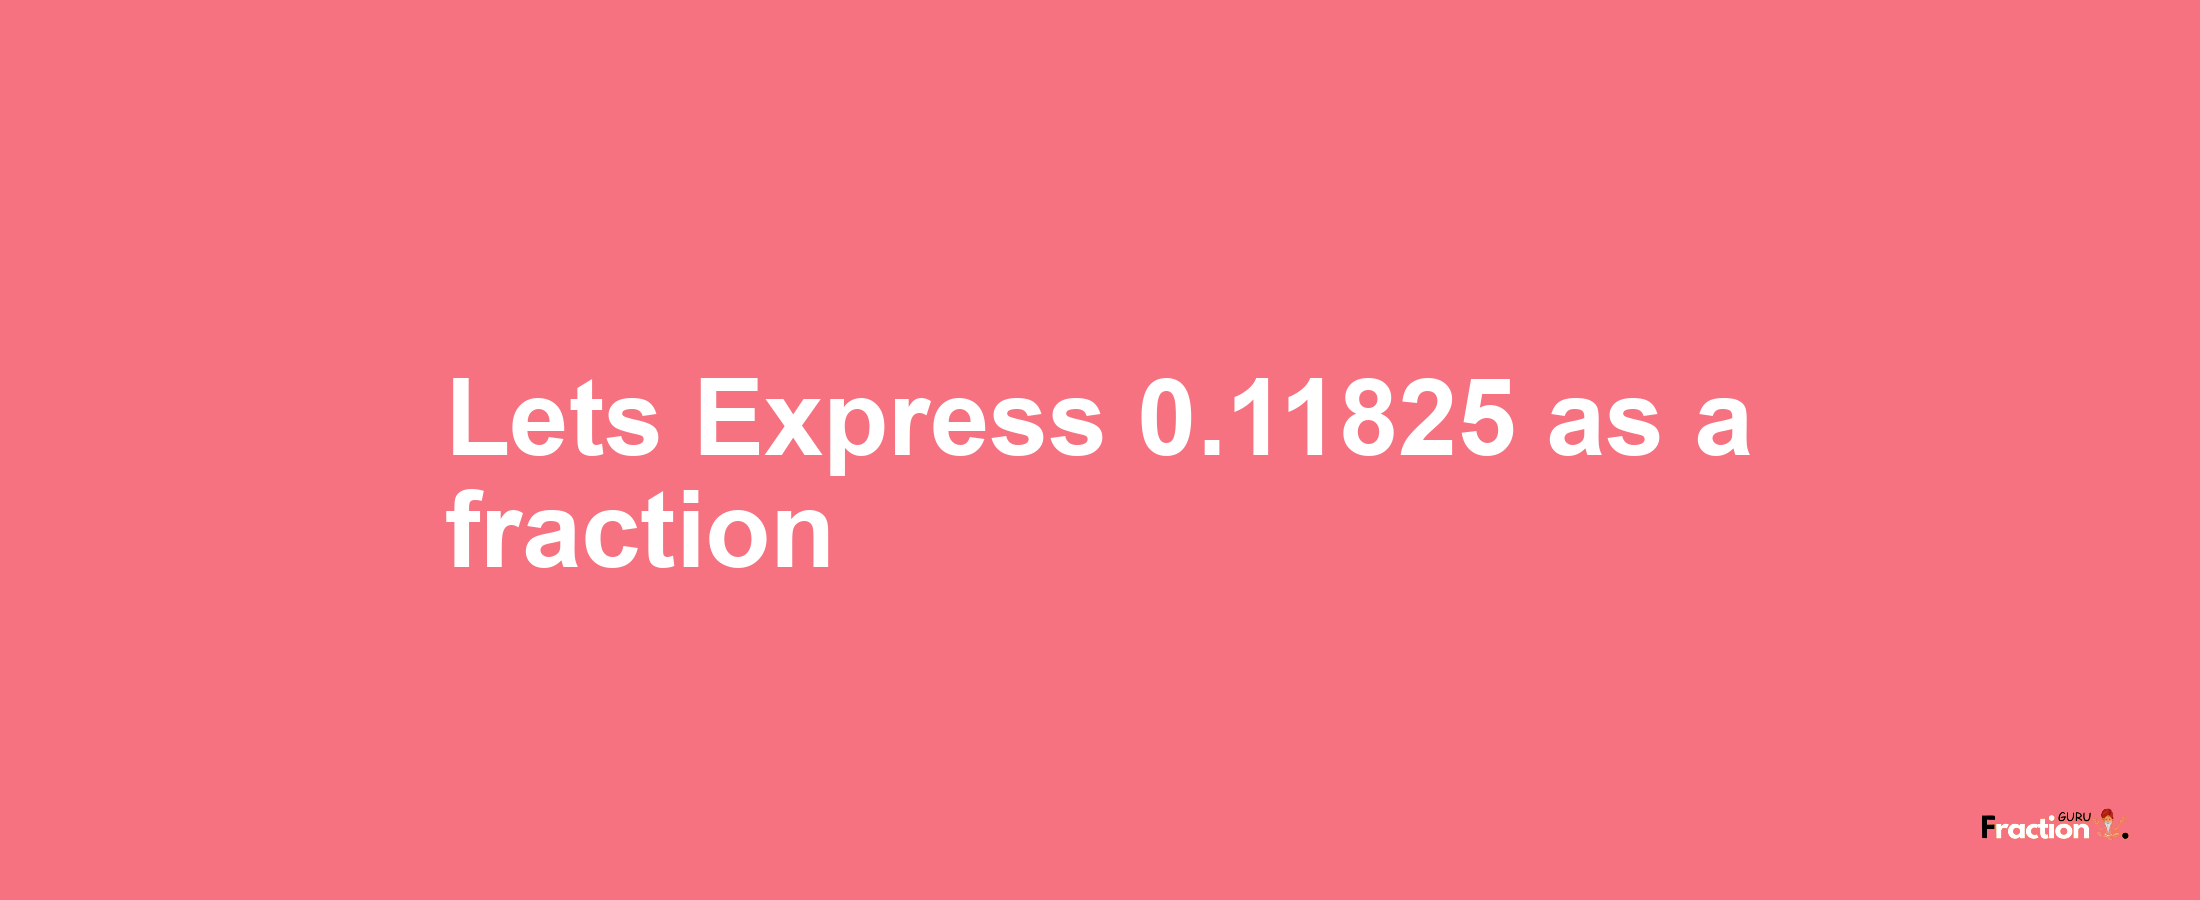 Lets Express 0.11825 as afraction